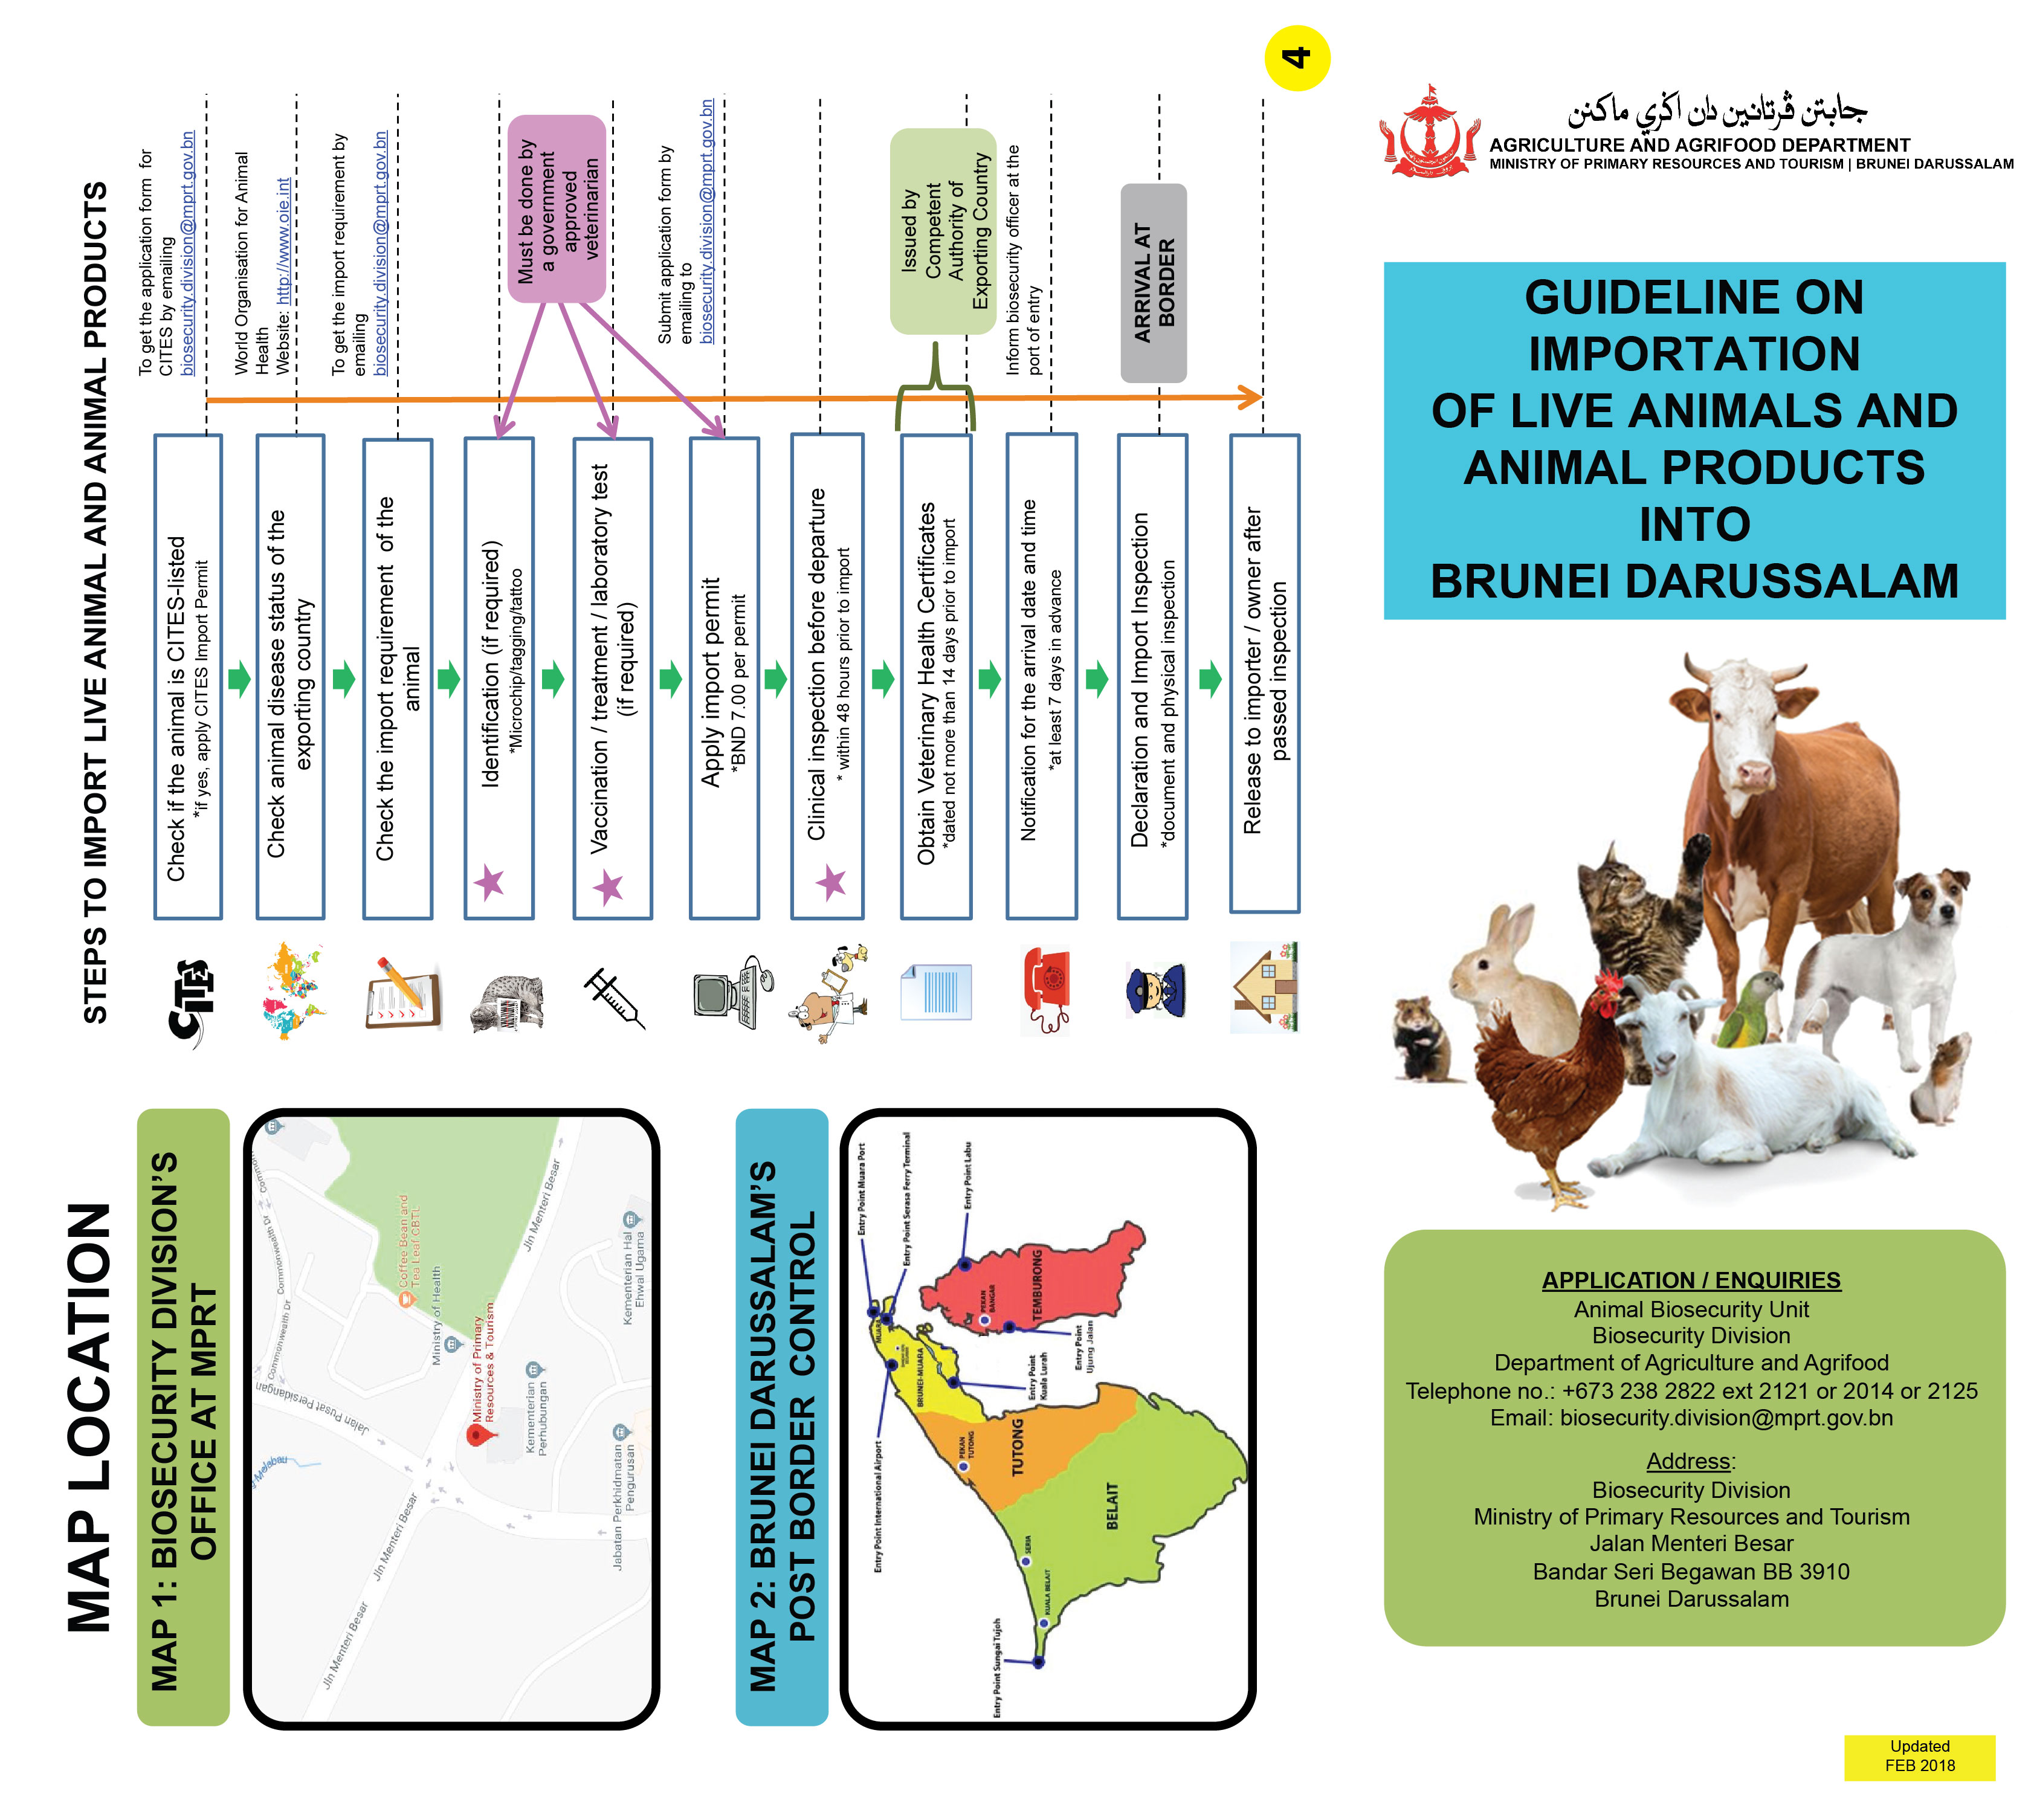 2 Importation Of Live Animals And Animal Products Into Brunei Darussalam.jpg